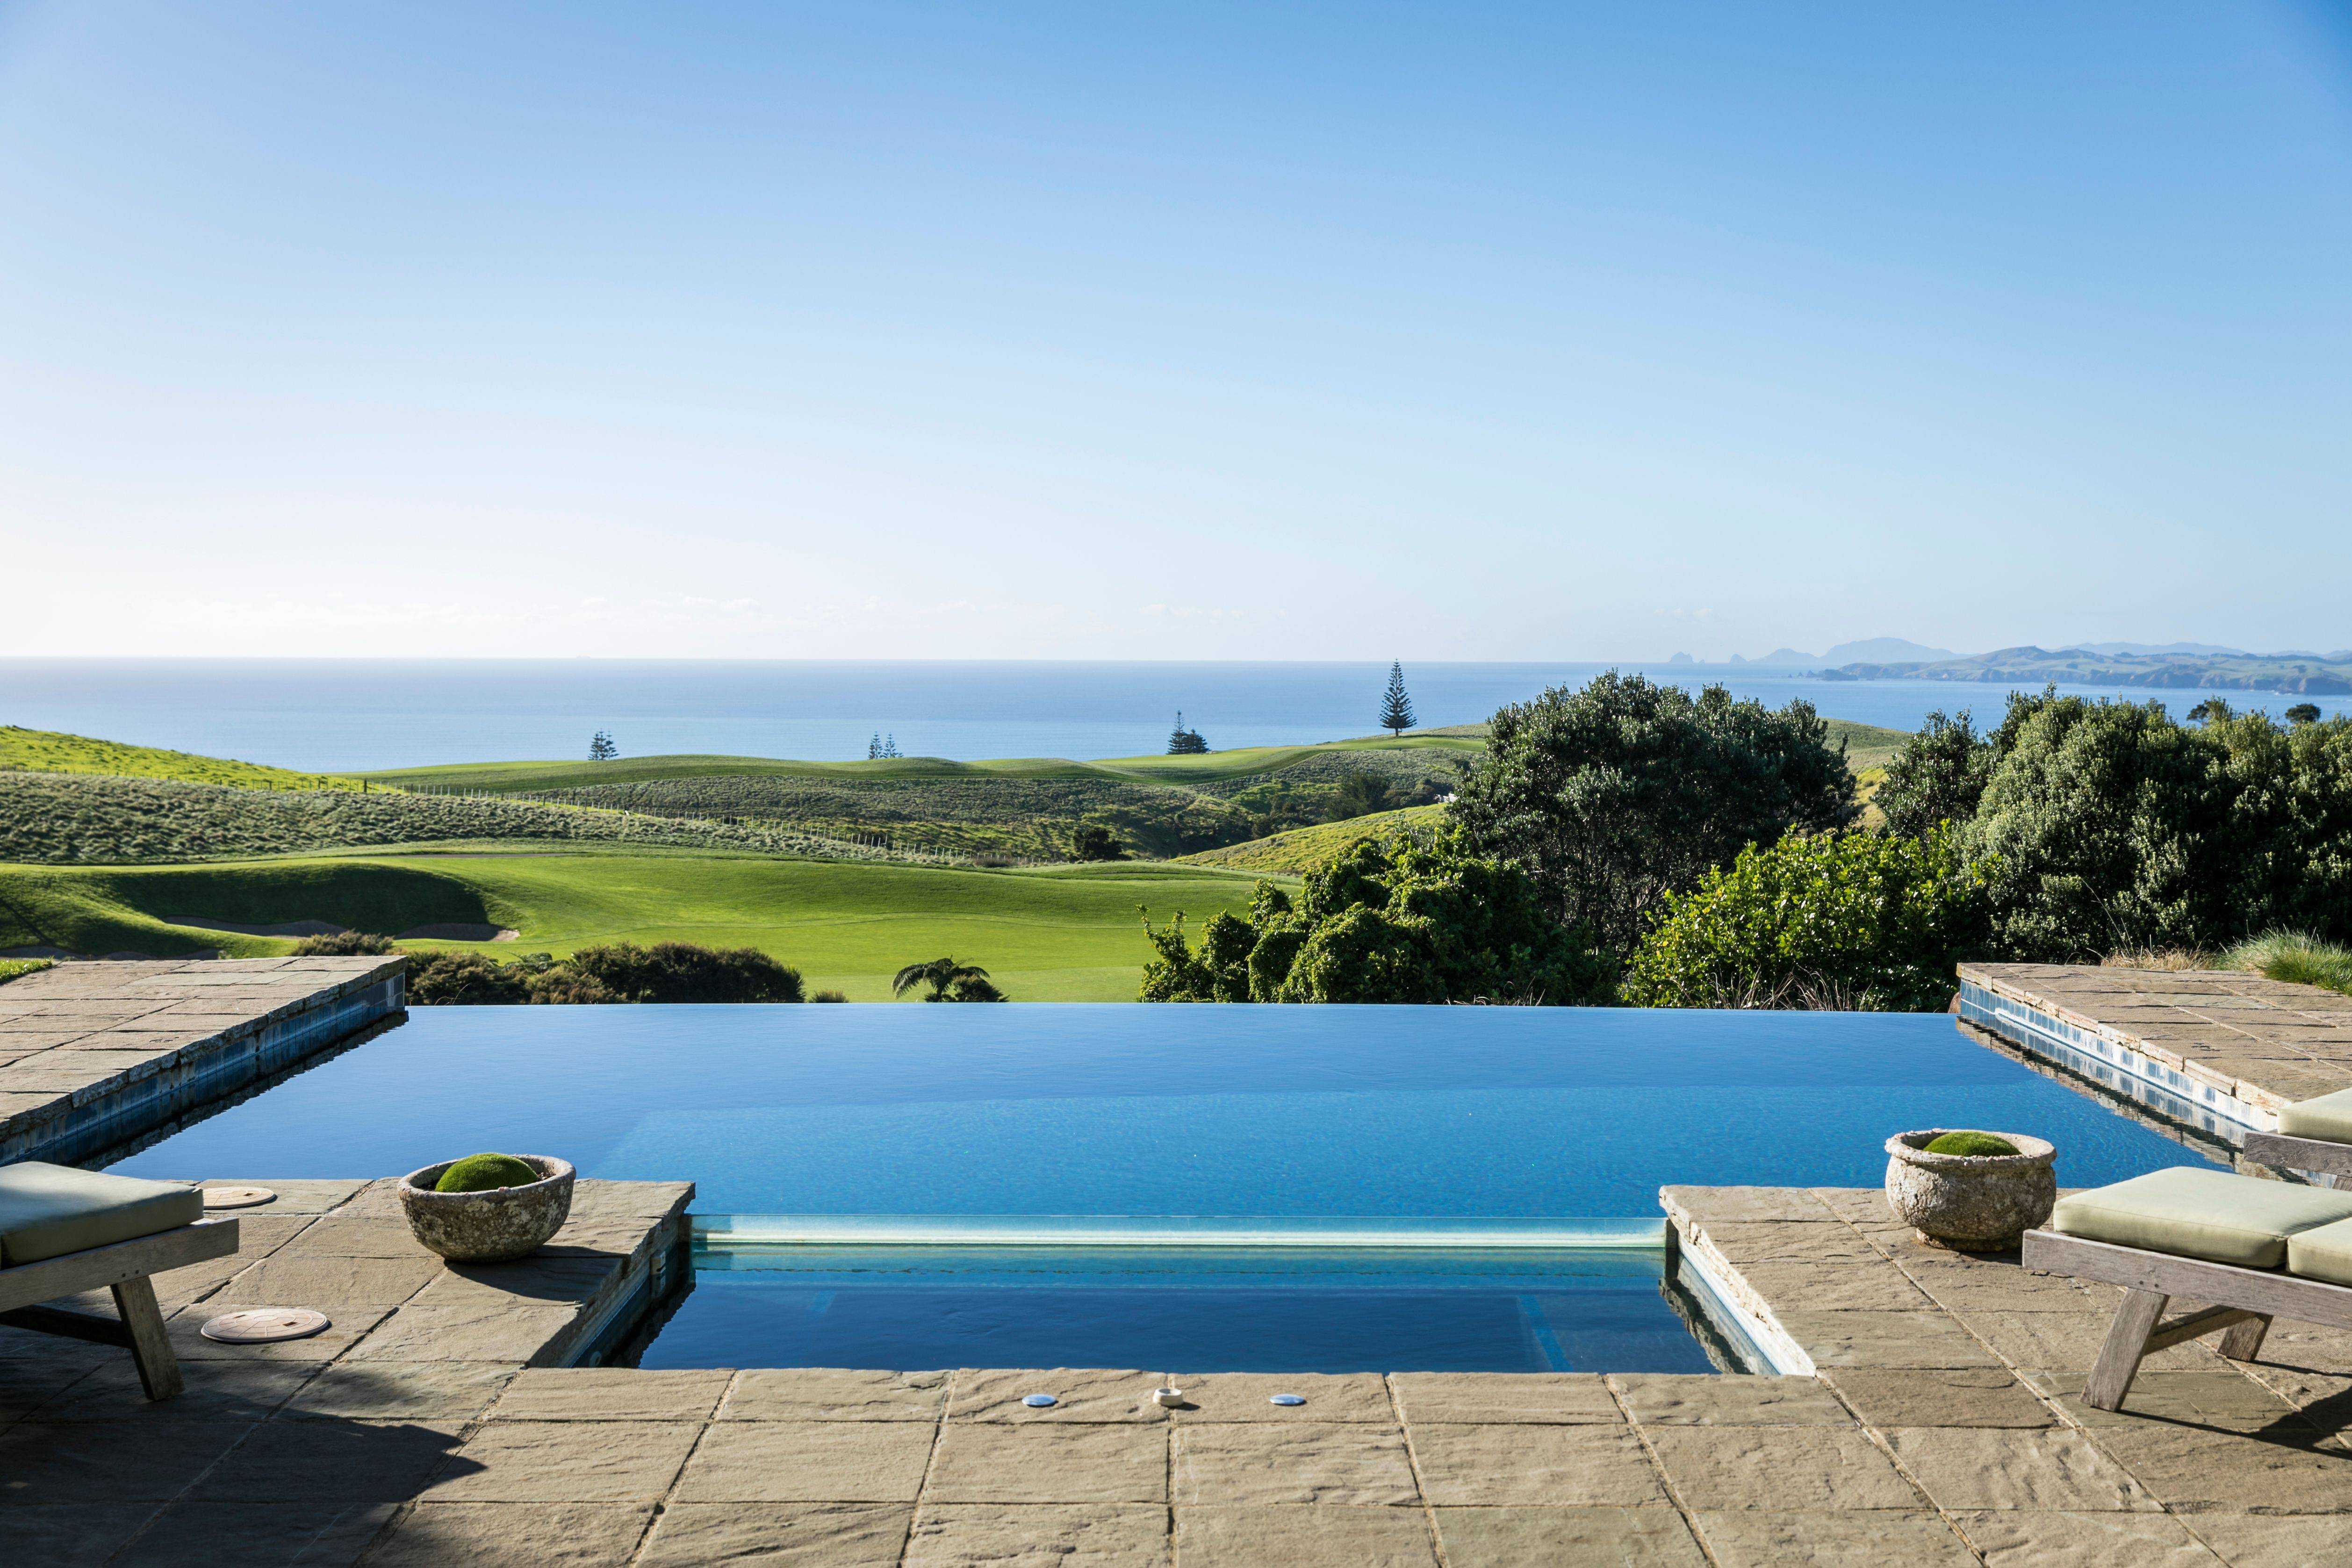 Best Luxury Lodges and Villas in New Zealand - The Lodge at Kauri Cliffs